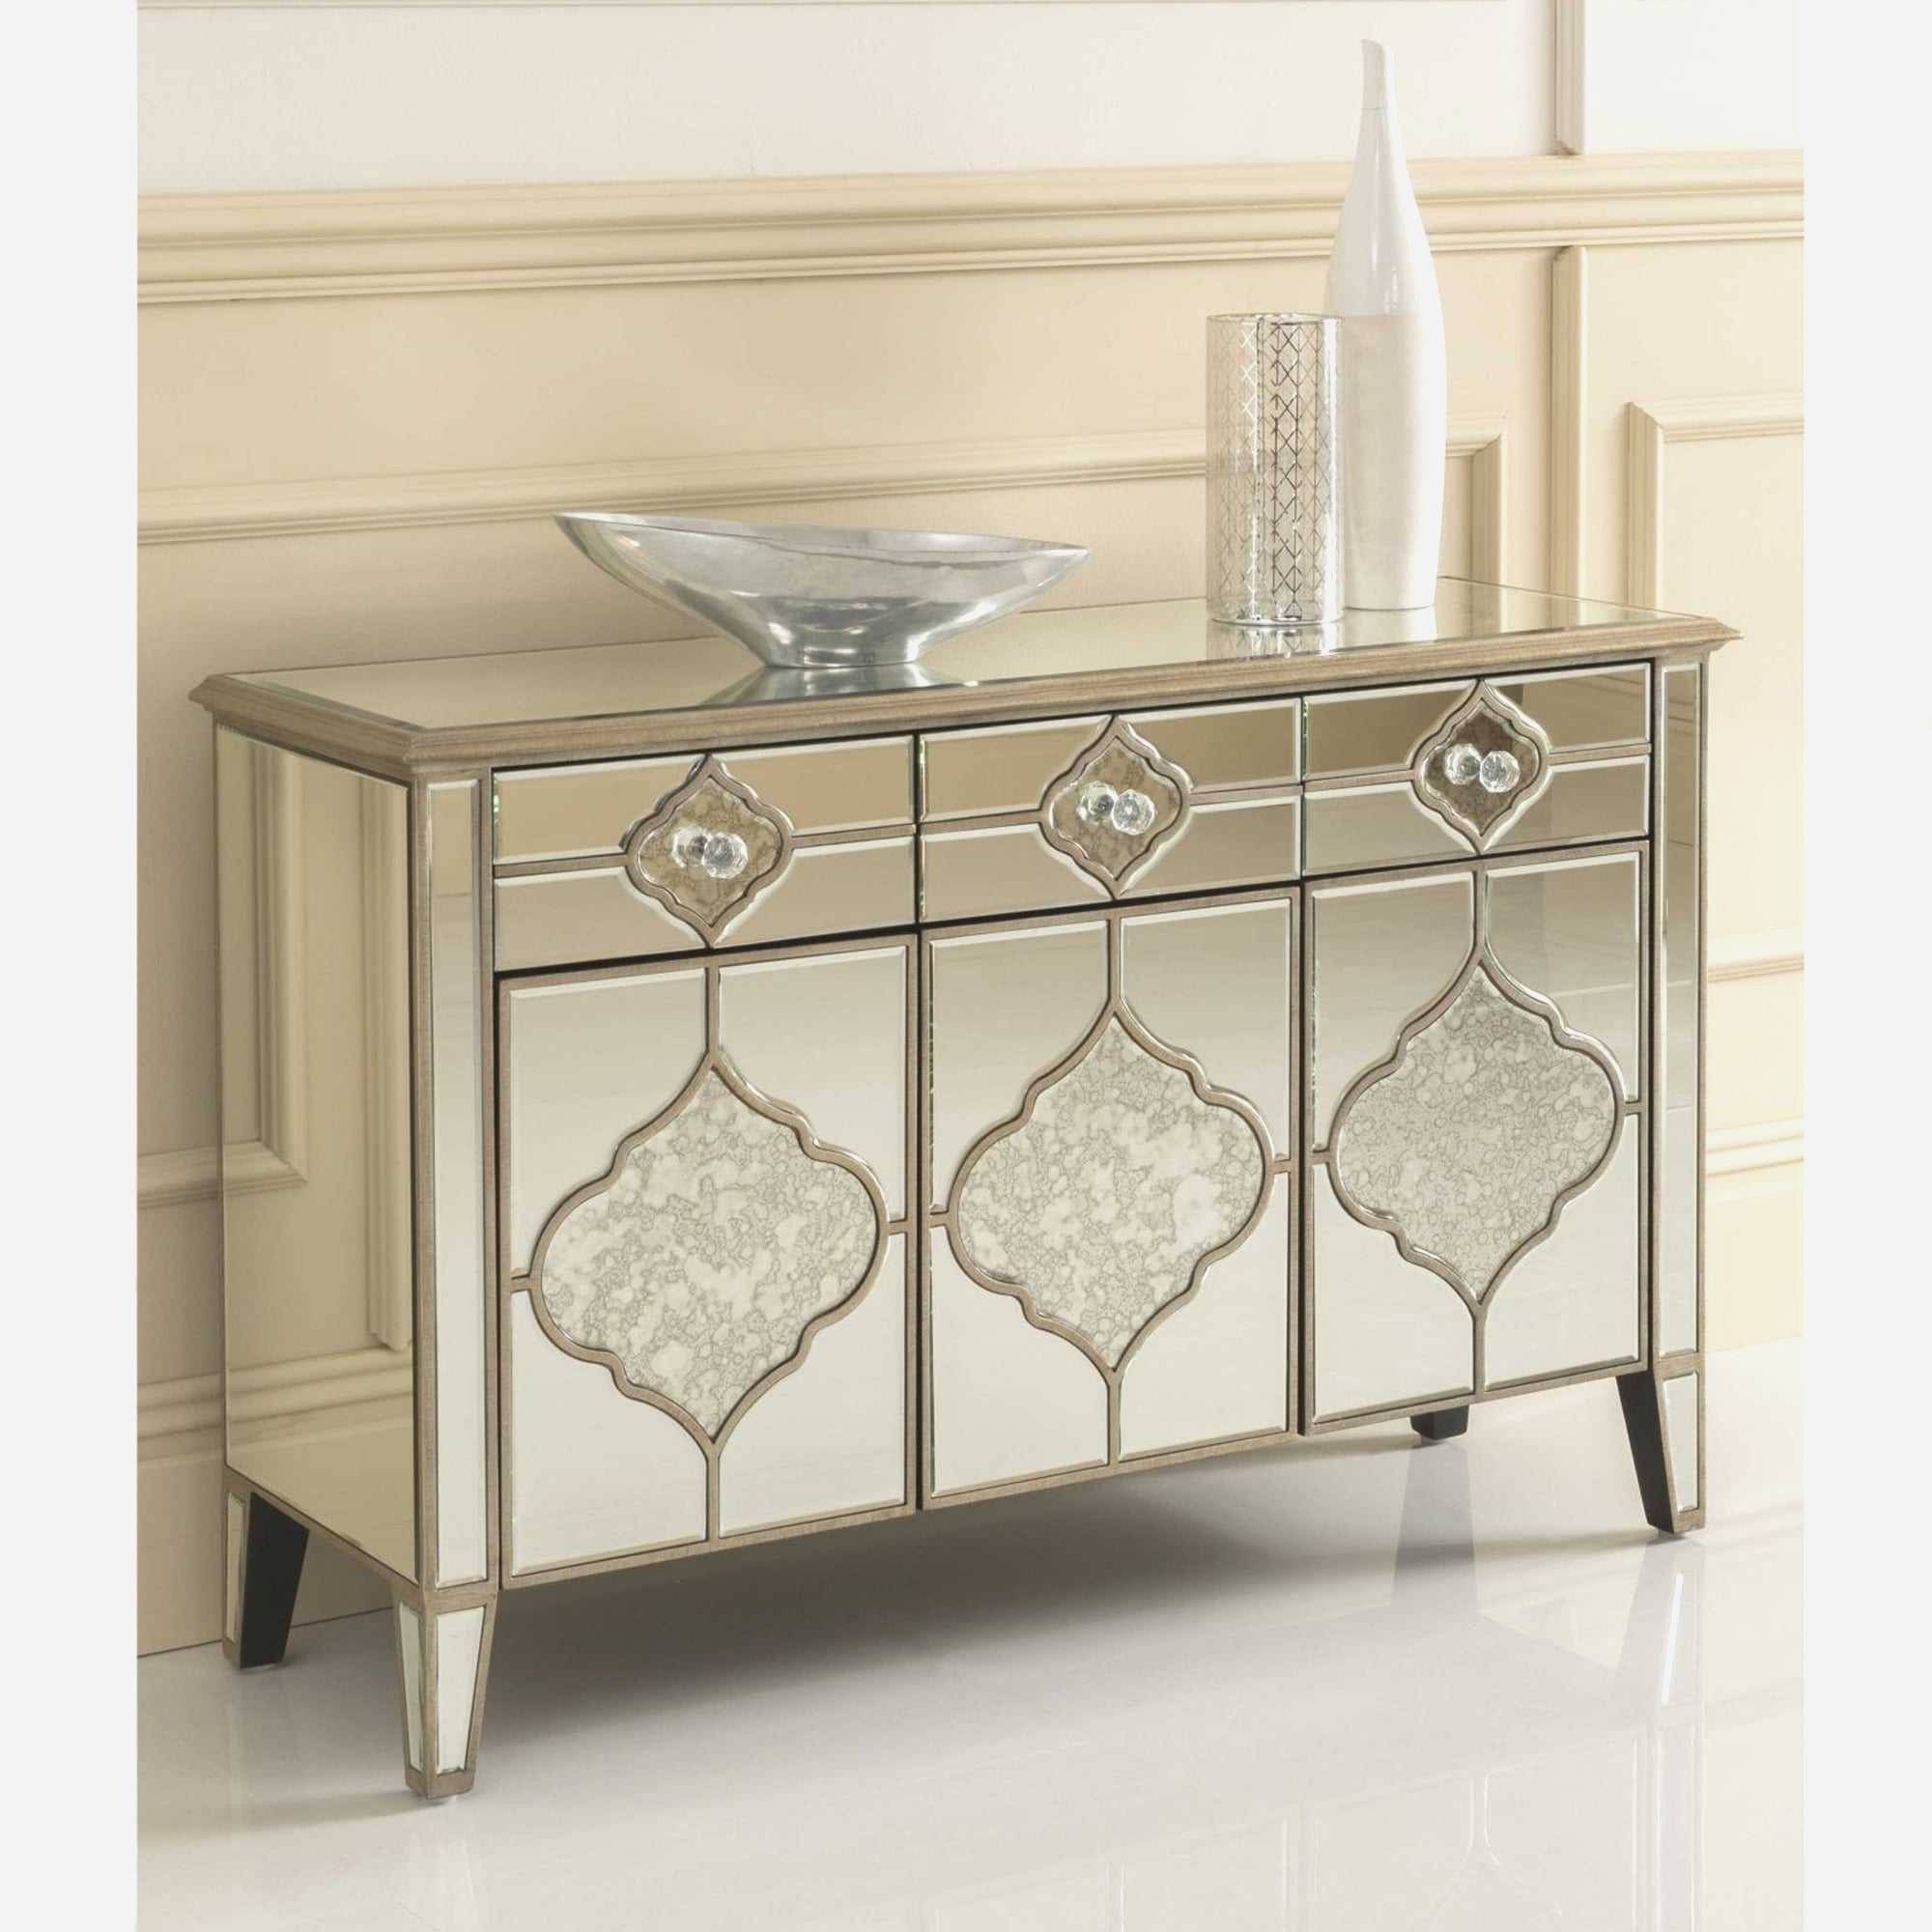 Mirrored Sideboards And Buffets: Mirrored Sideboards And Buffets Within Mirrored Sideboards And Buffets (View 3 of 15)